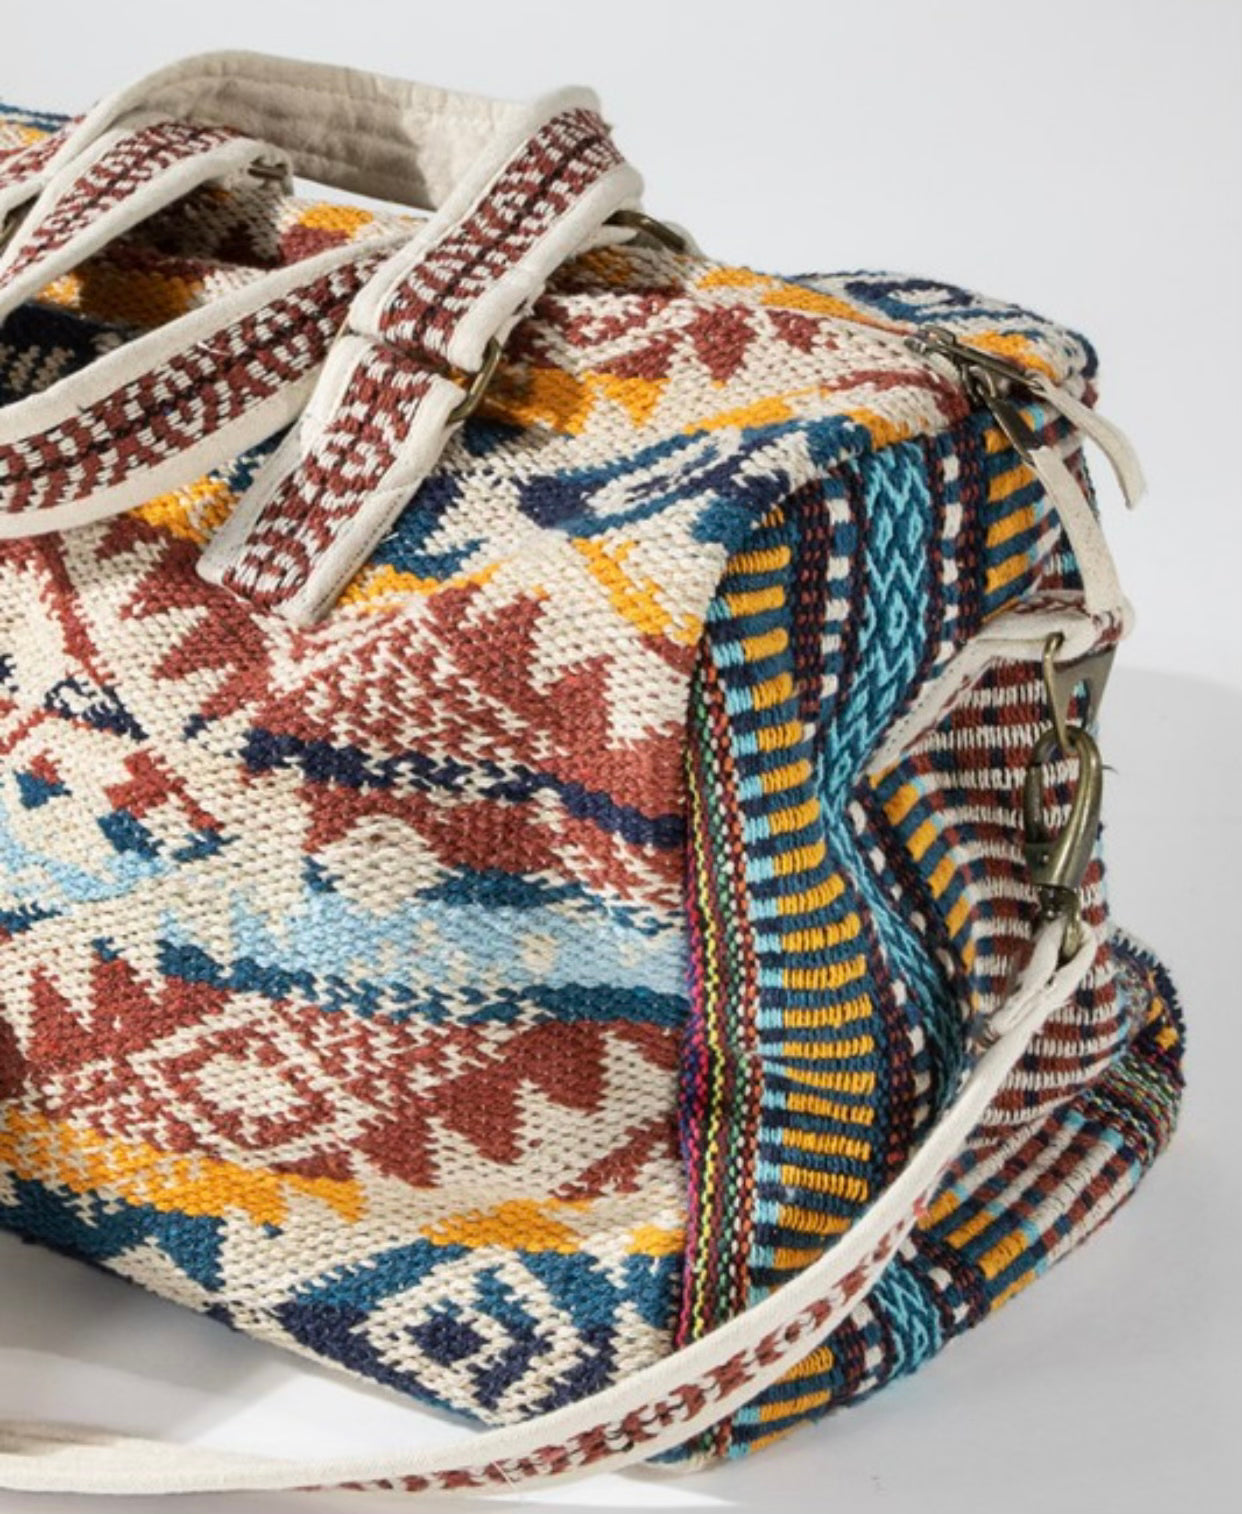 Ethnic Duffle Bag - CountryFide Custom Accessories and Outdoors